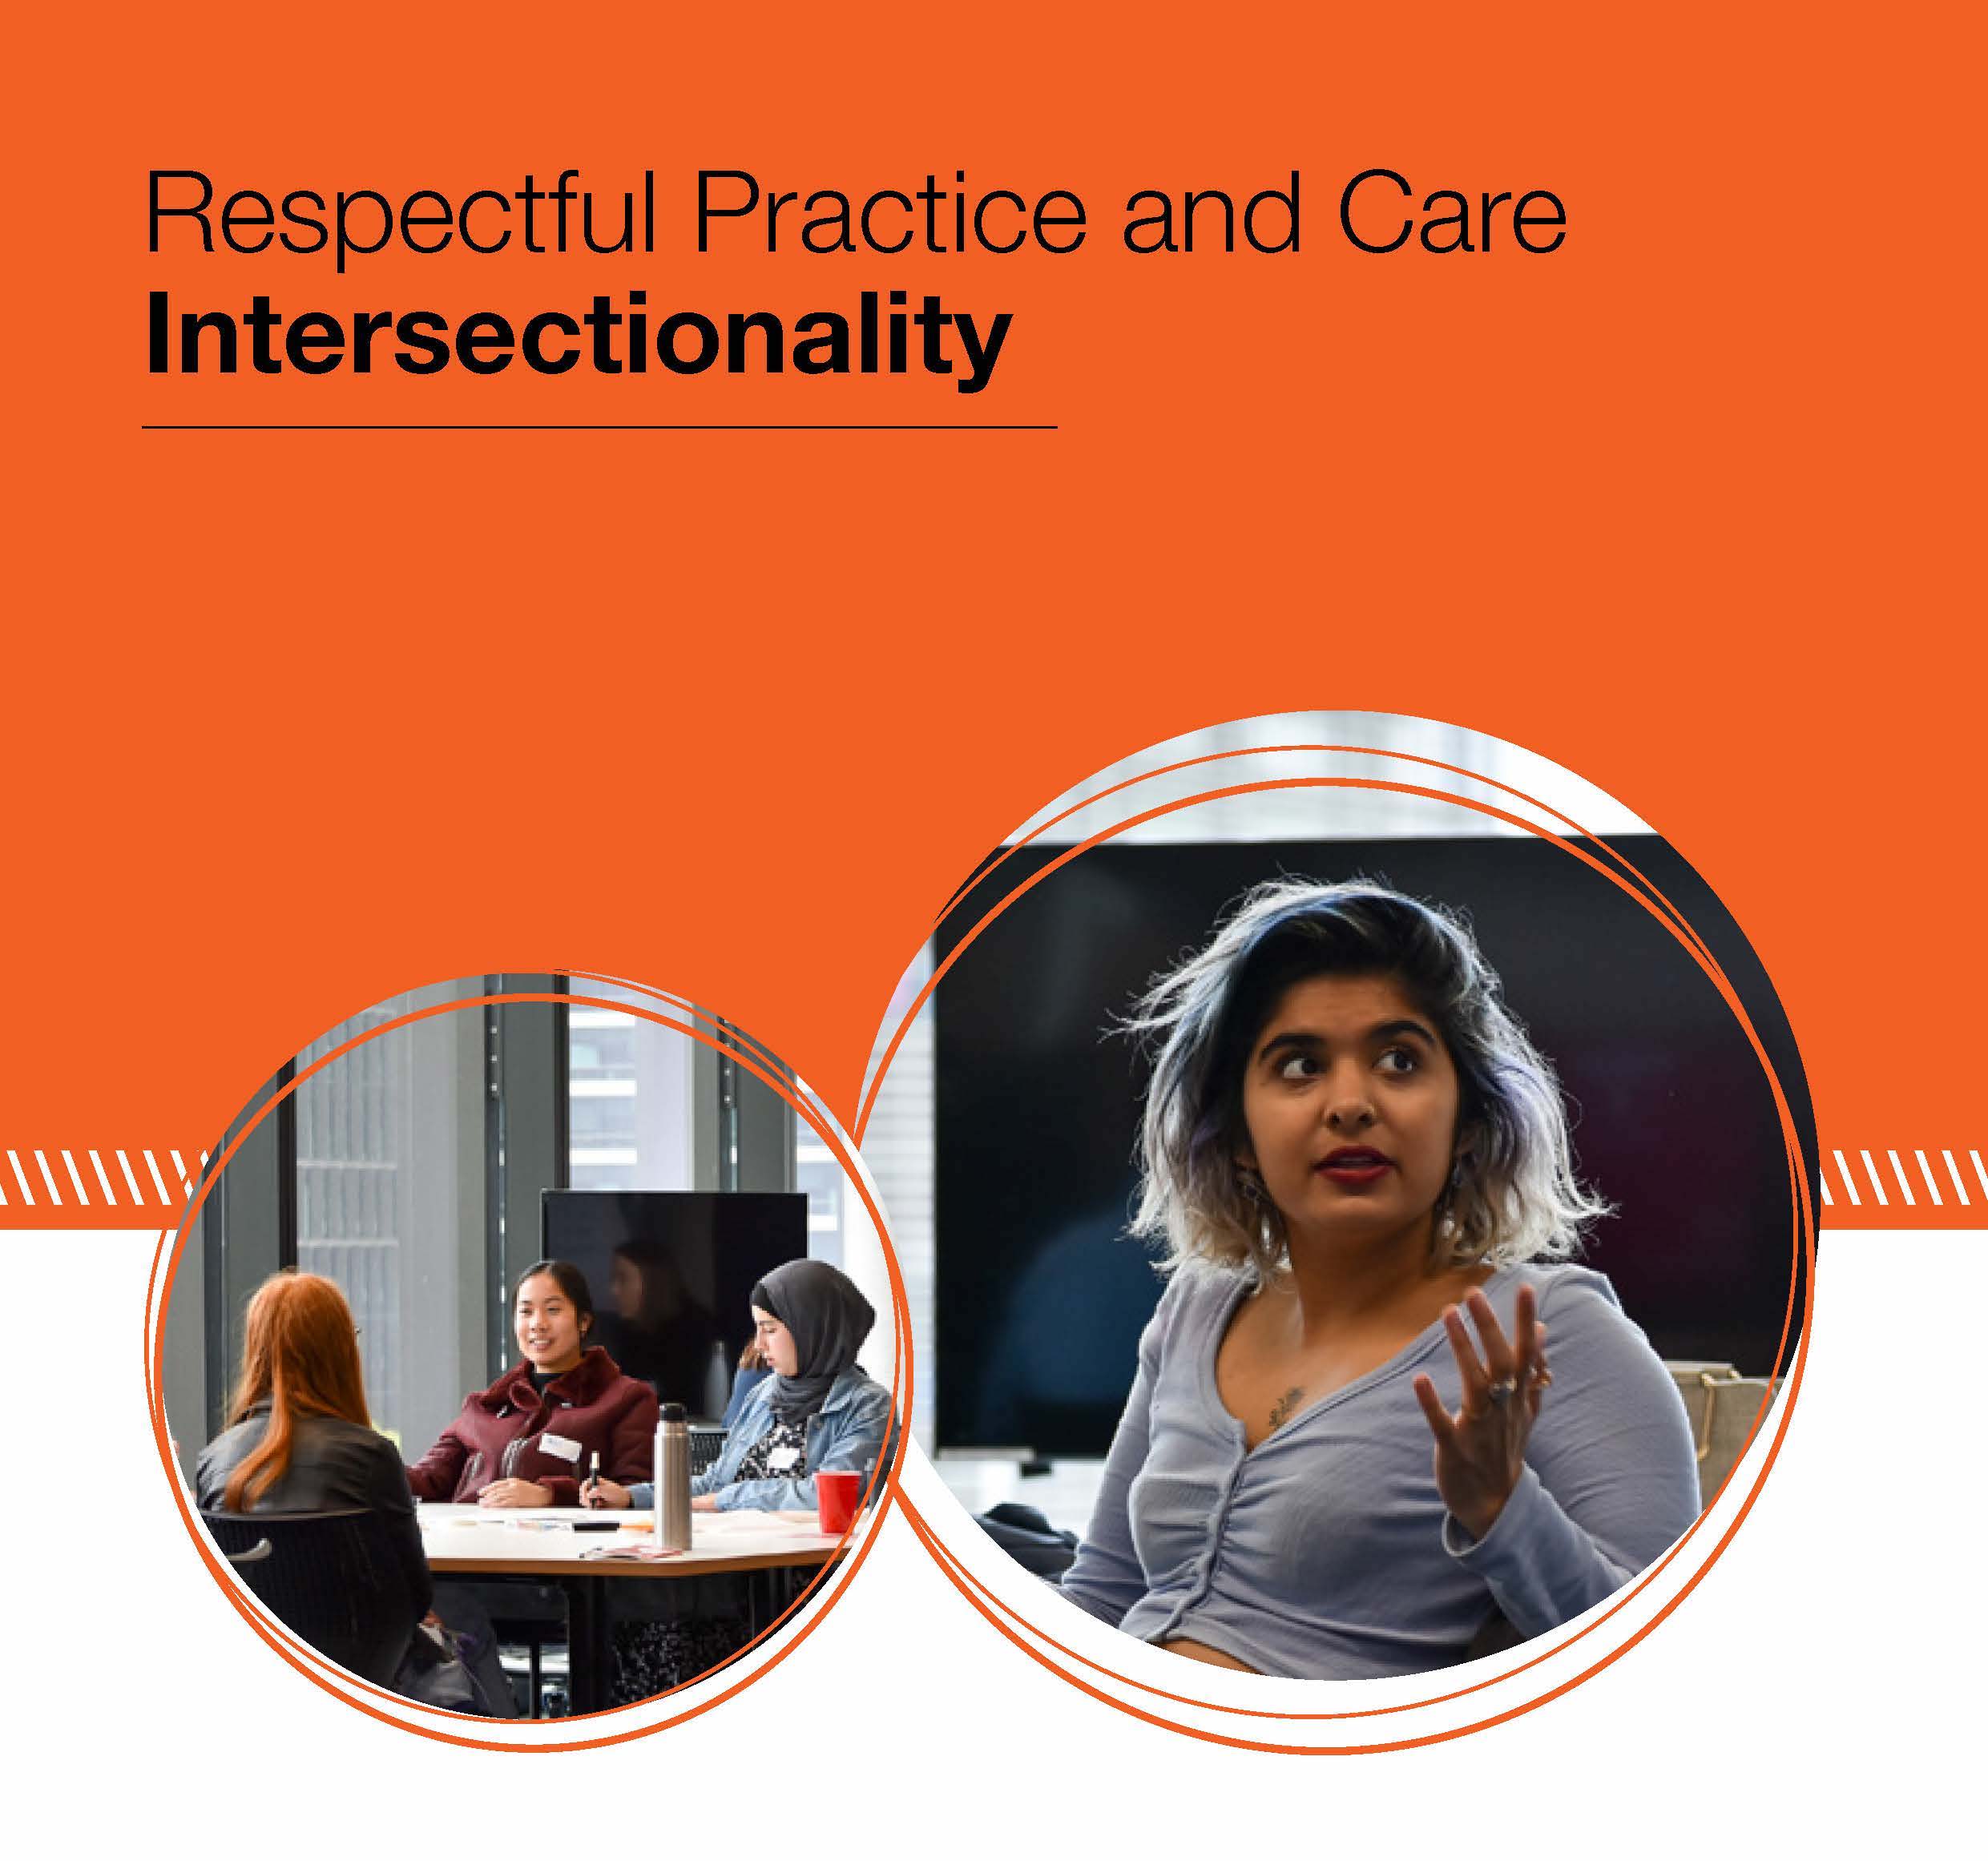 RESPECTFUL PRACTICE AND CARE INTERSECTIONALITY